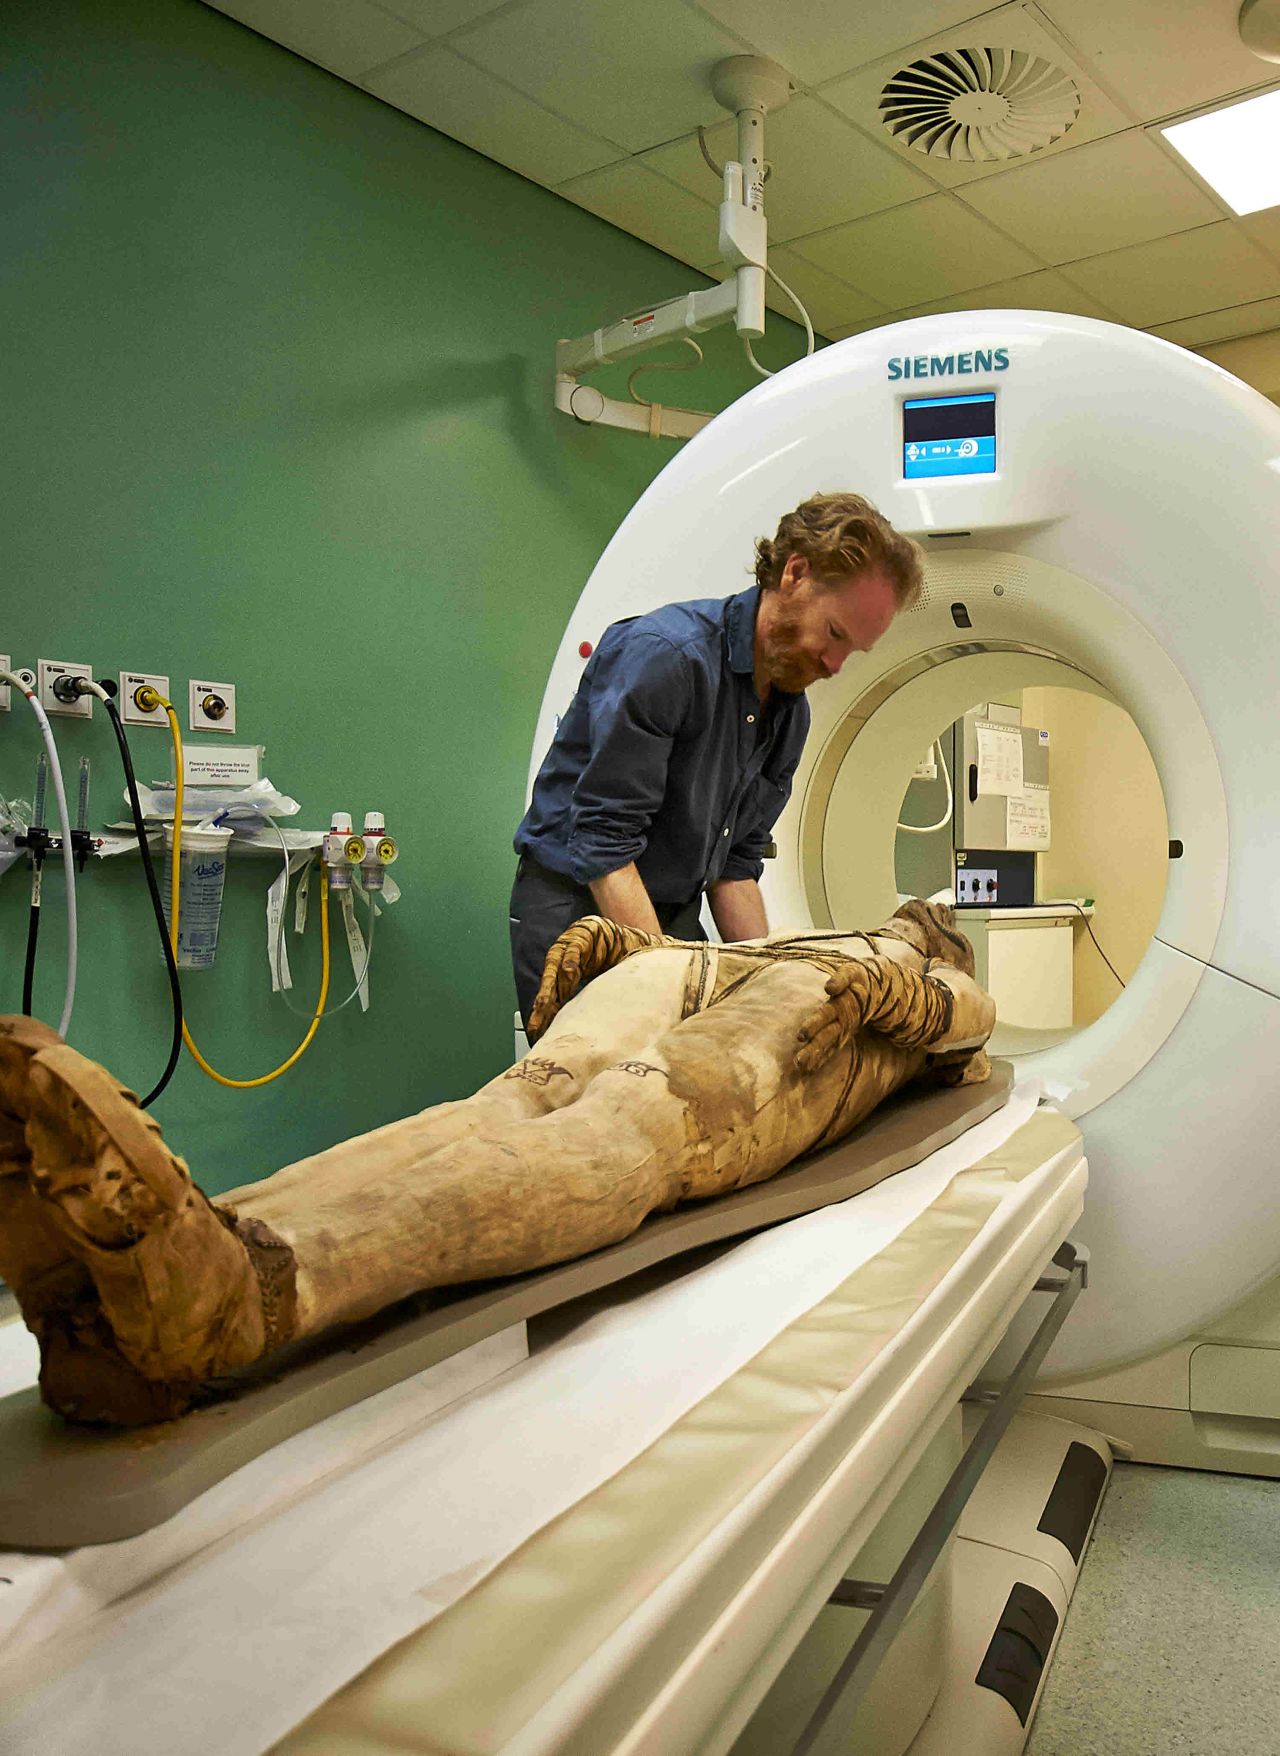 The British Museum has started scanning several mummies from its collection using a CT scanner from the Royal Brompton Hospital in London.